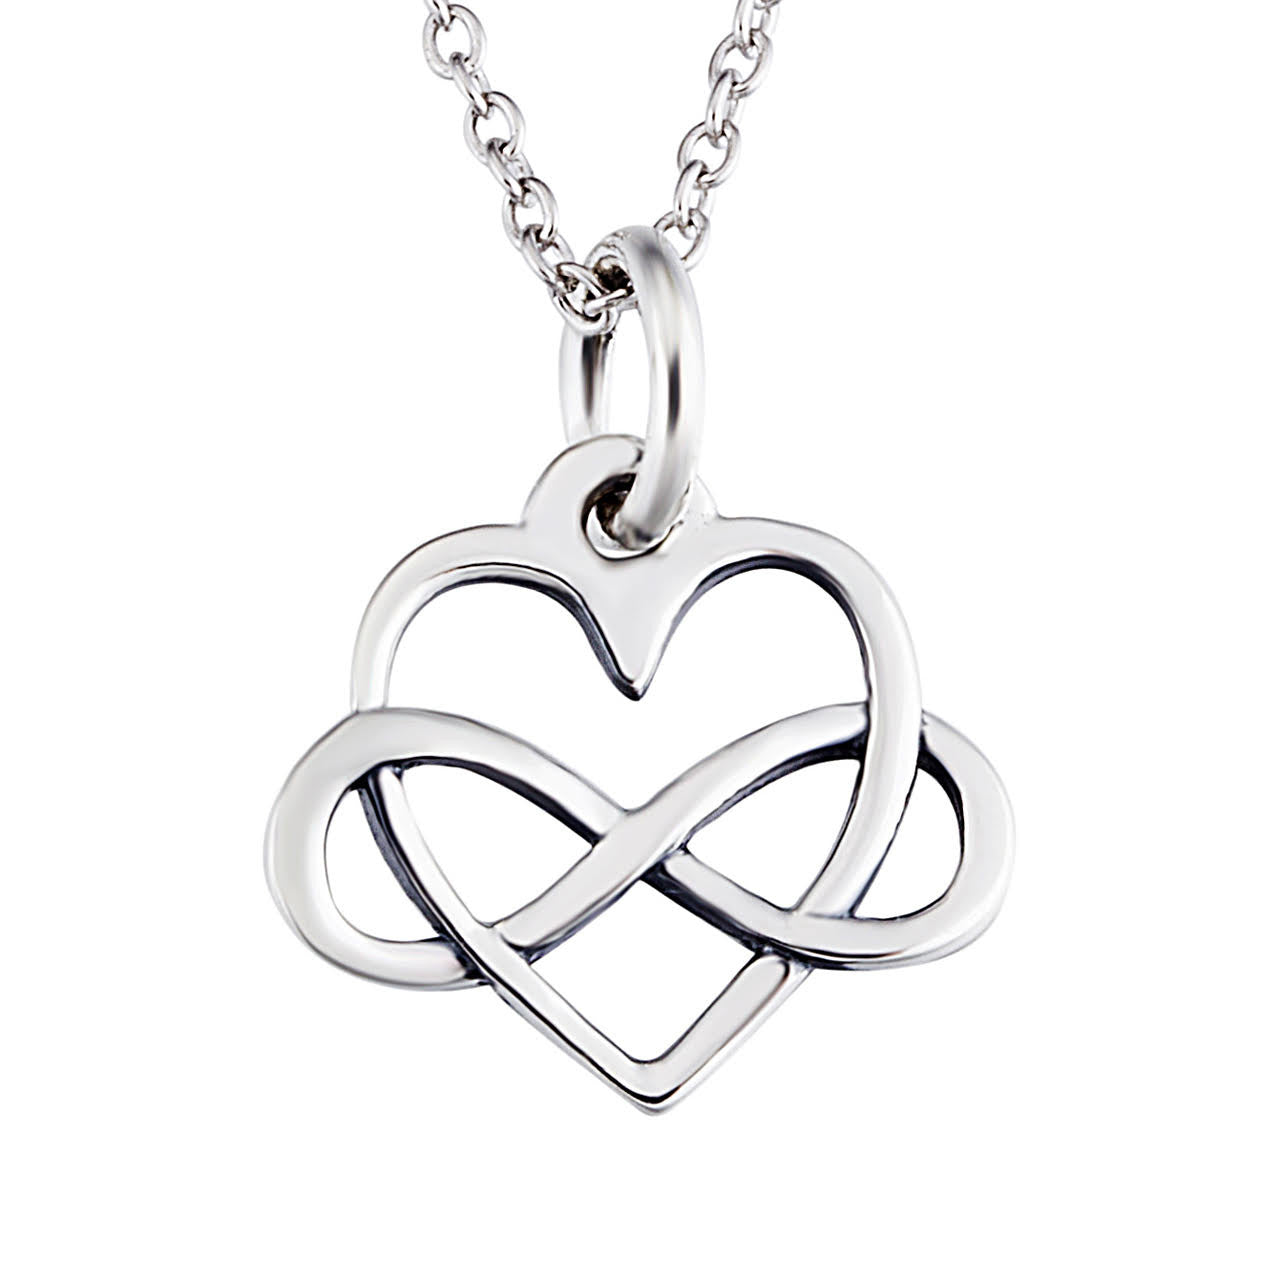 Sterling Silver Infinity Sign and Heart Pendant Necklace Casual and Formal Women